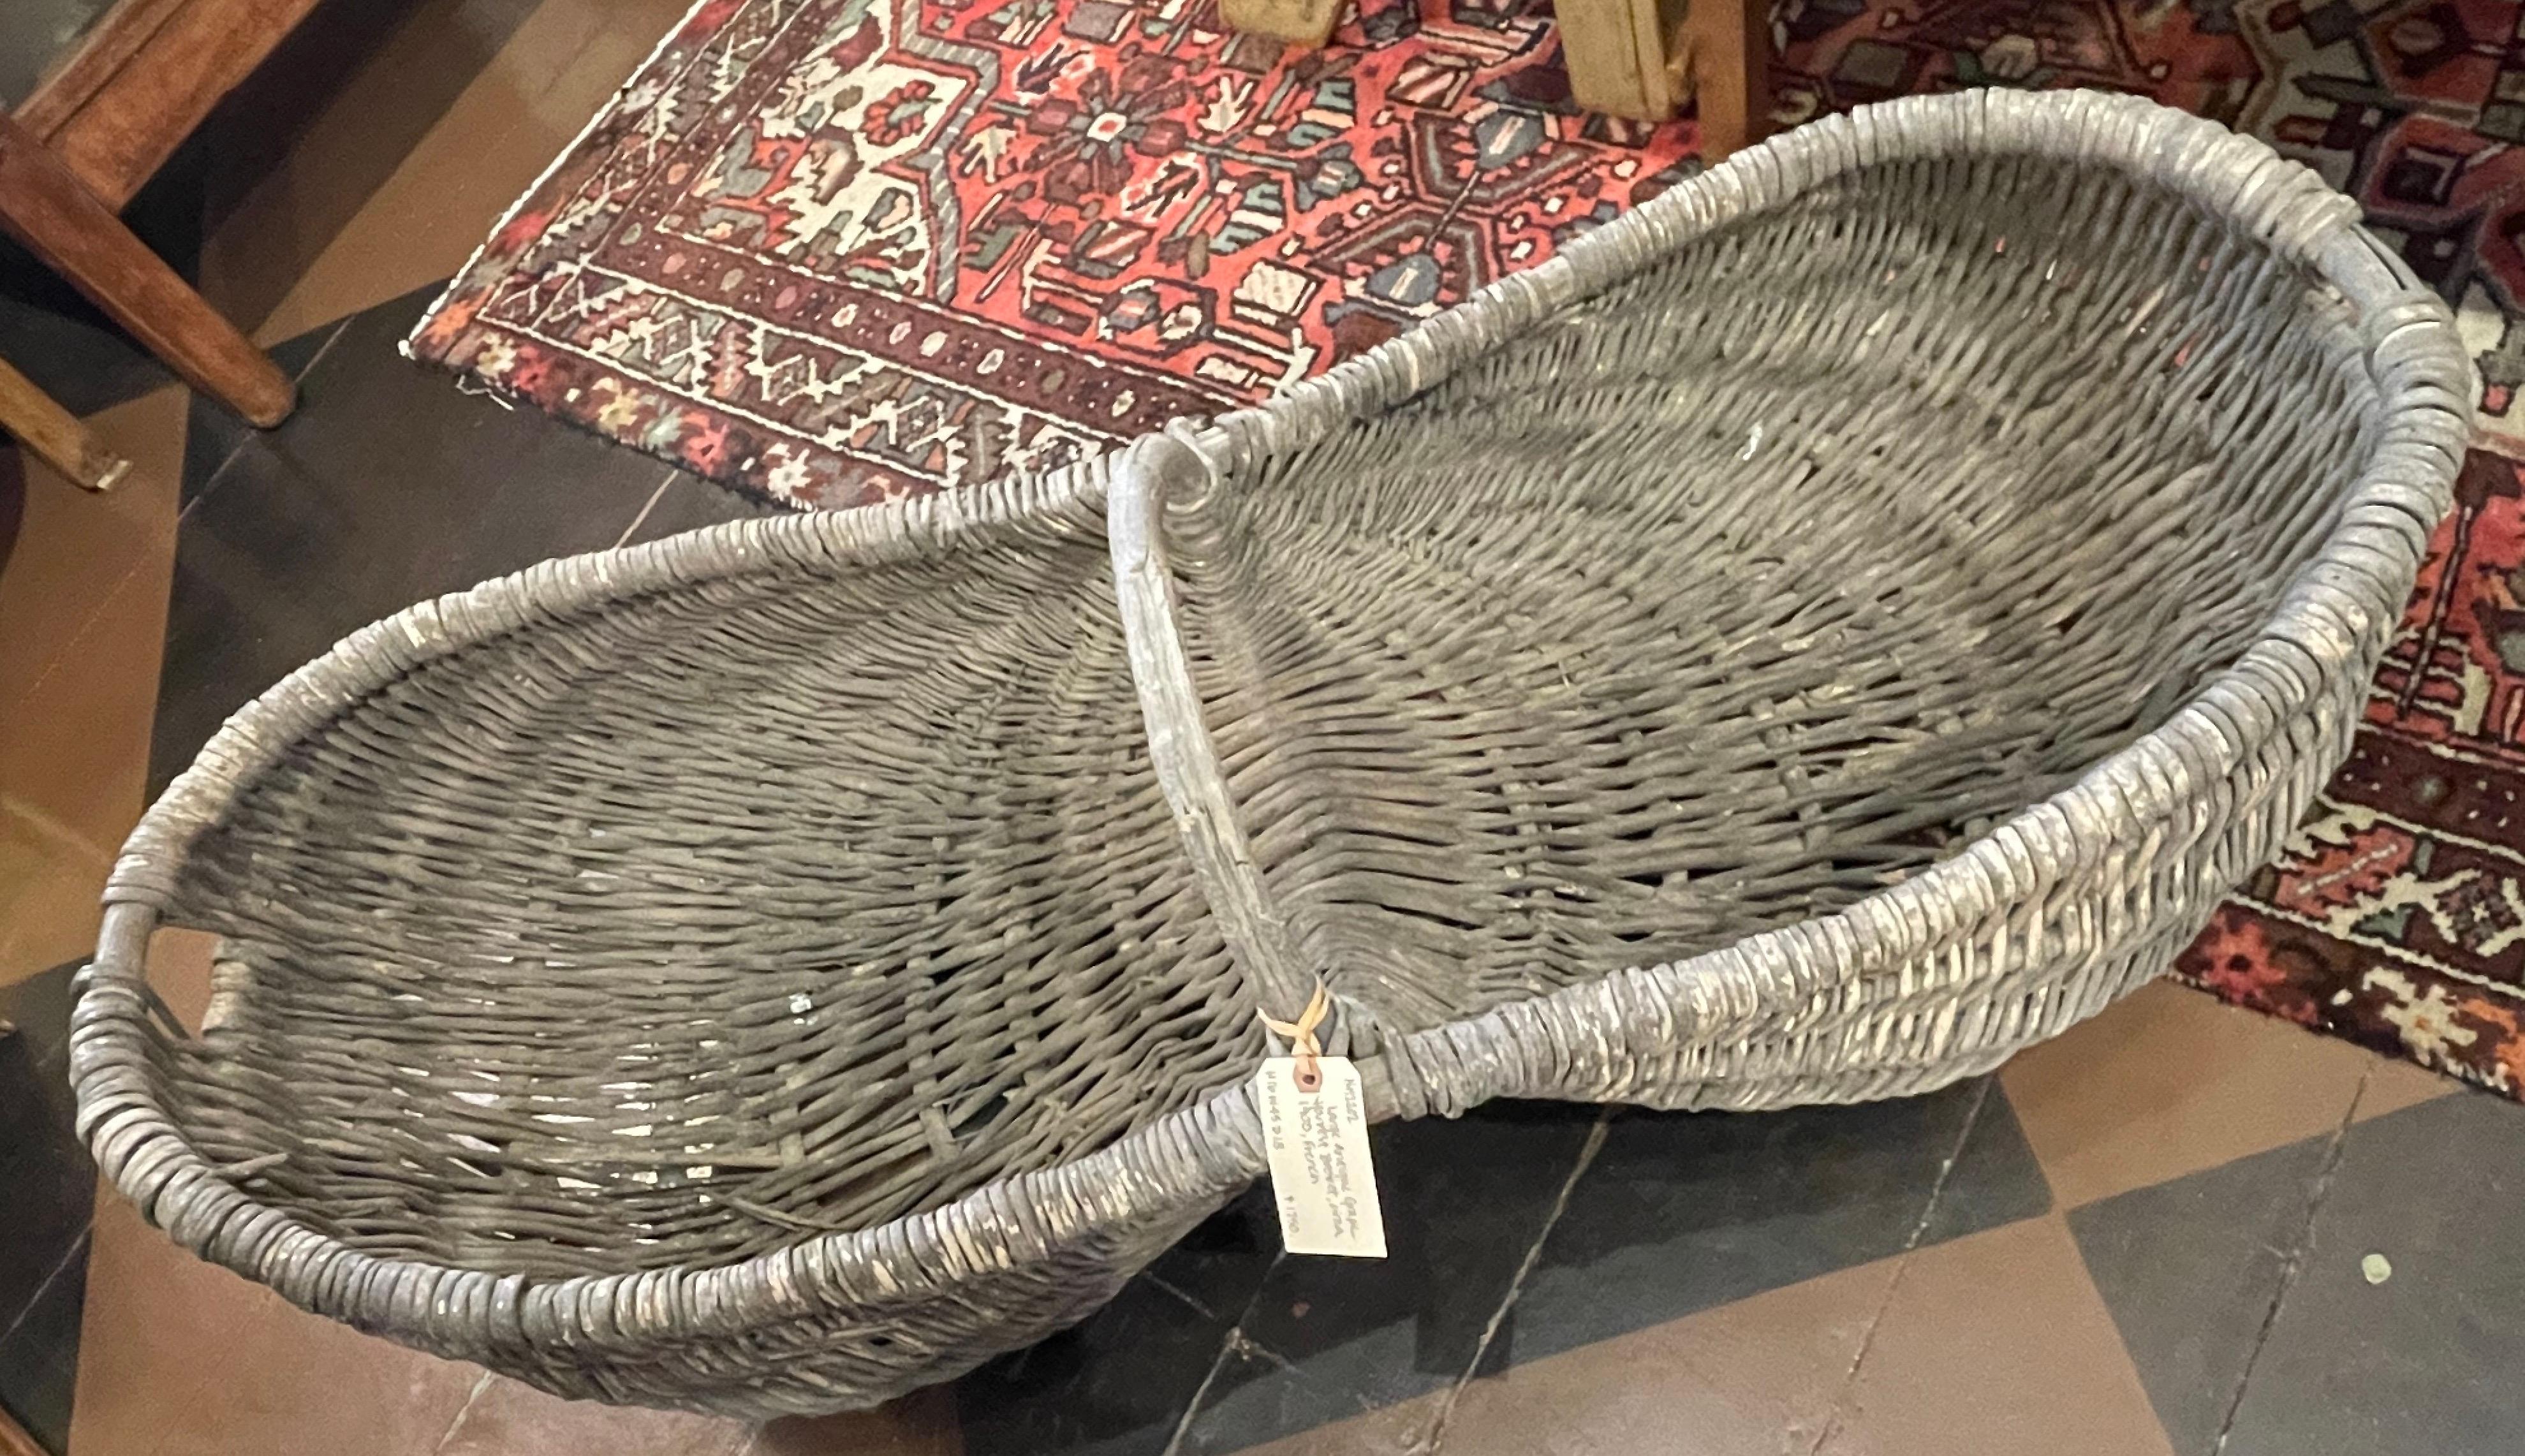 Lovely large sized grape harvesting/gathering basket from the Burgundy region of France. Handwoven with wicker over wooden frame, with central arched carrying handle. Old weathered surface, great structural condition, circa 1900.